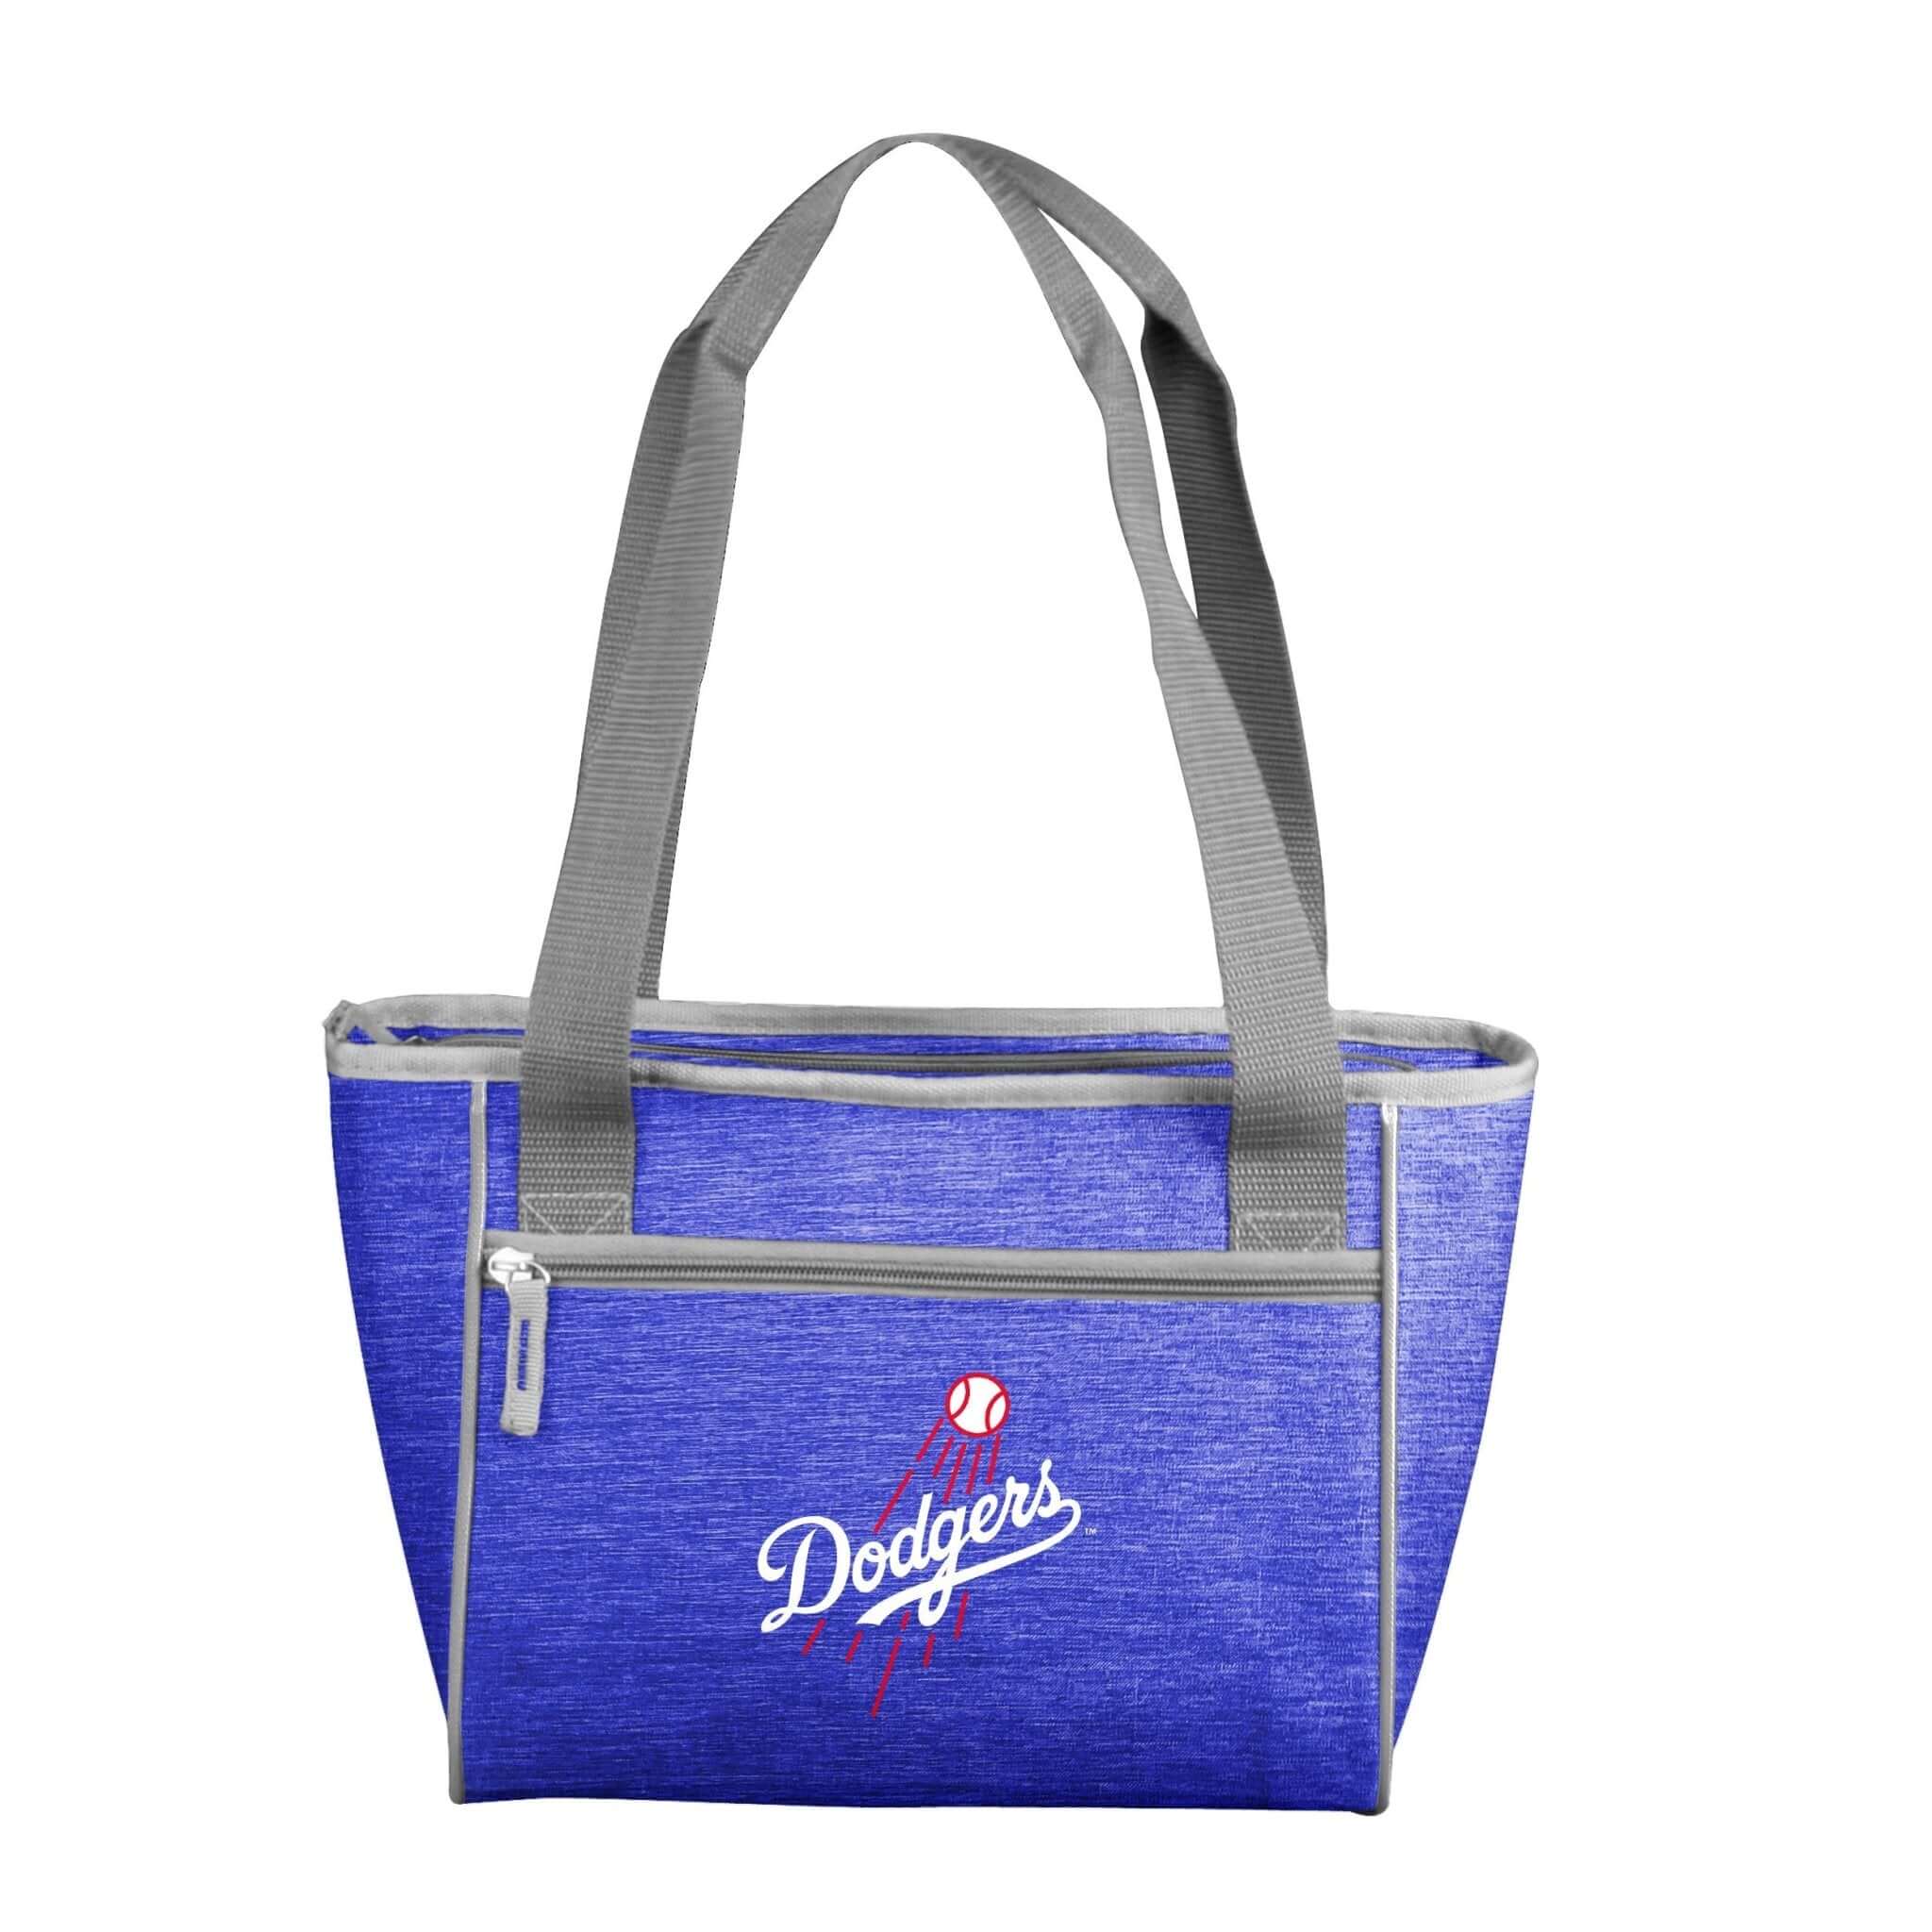 los angels dodgers clear bag rules｜TikTok Search